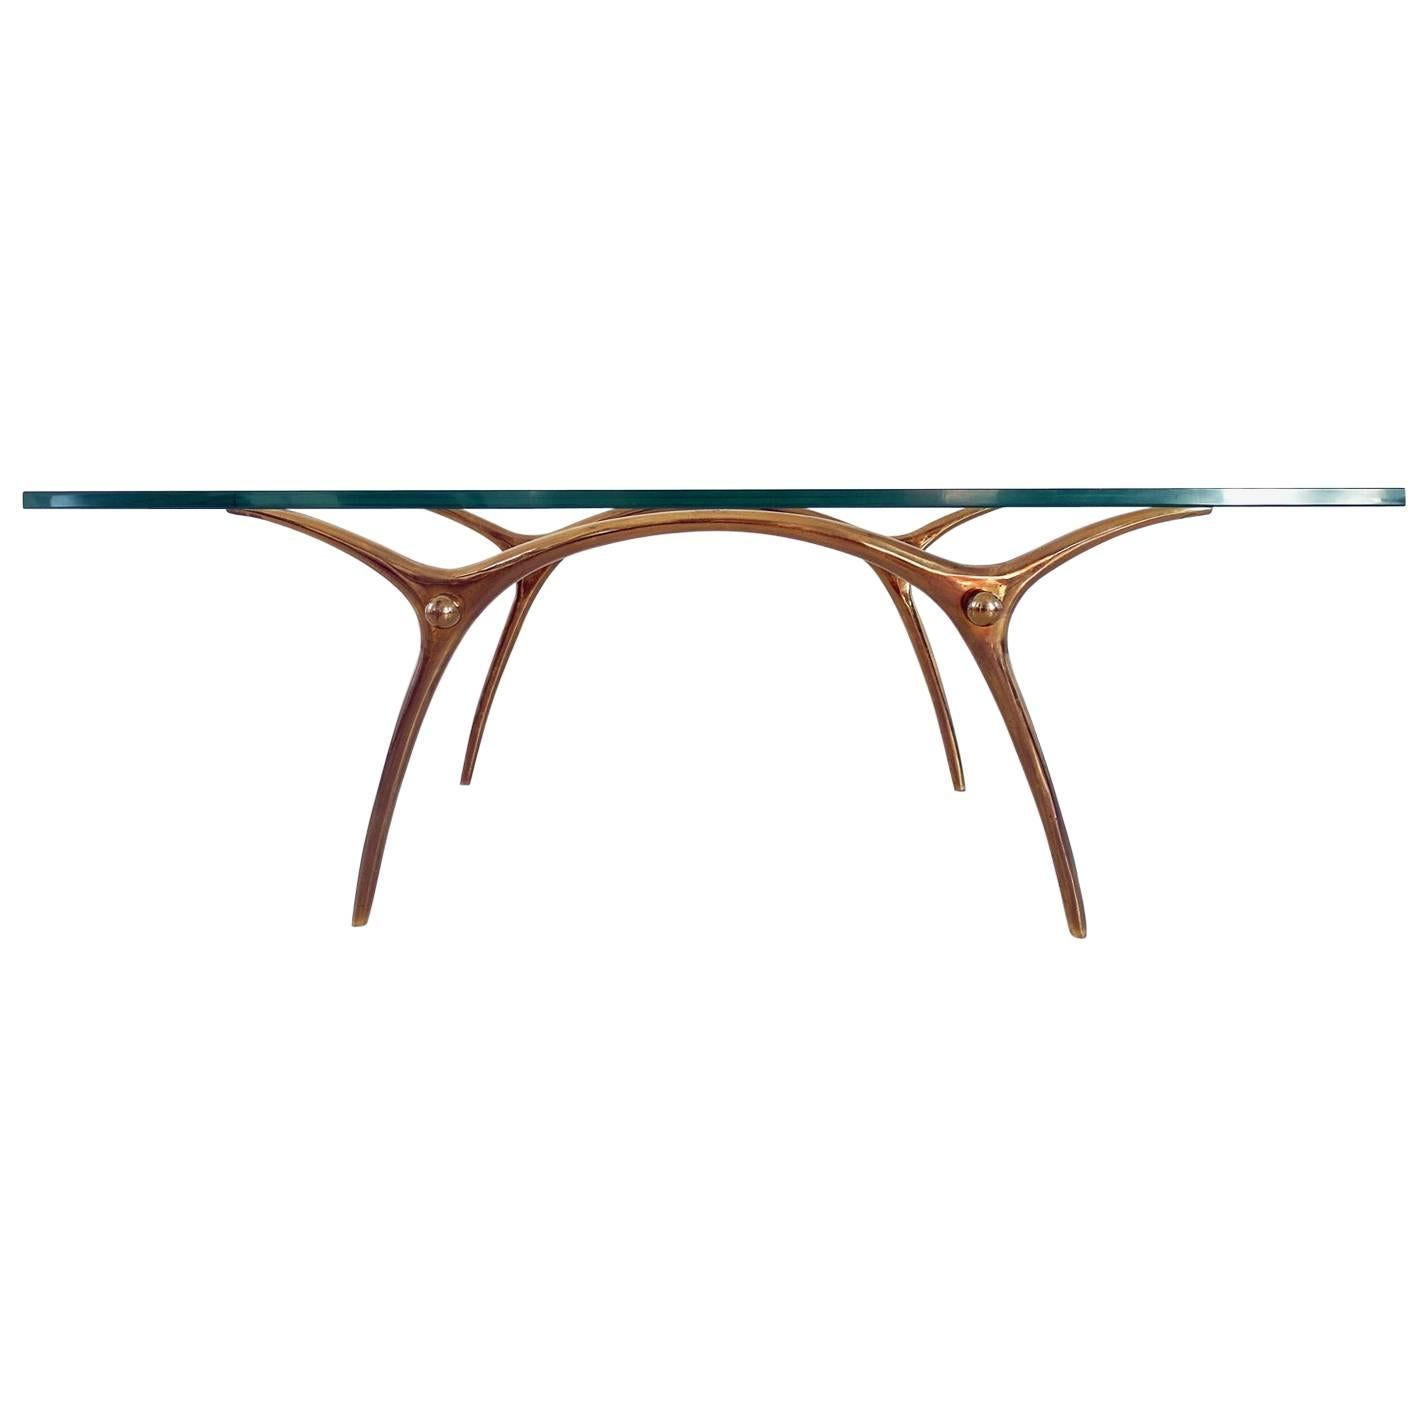 Kouloufi Coffee Table in Glass an Polished Brass, Brussels, 1958 For Sale